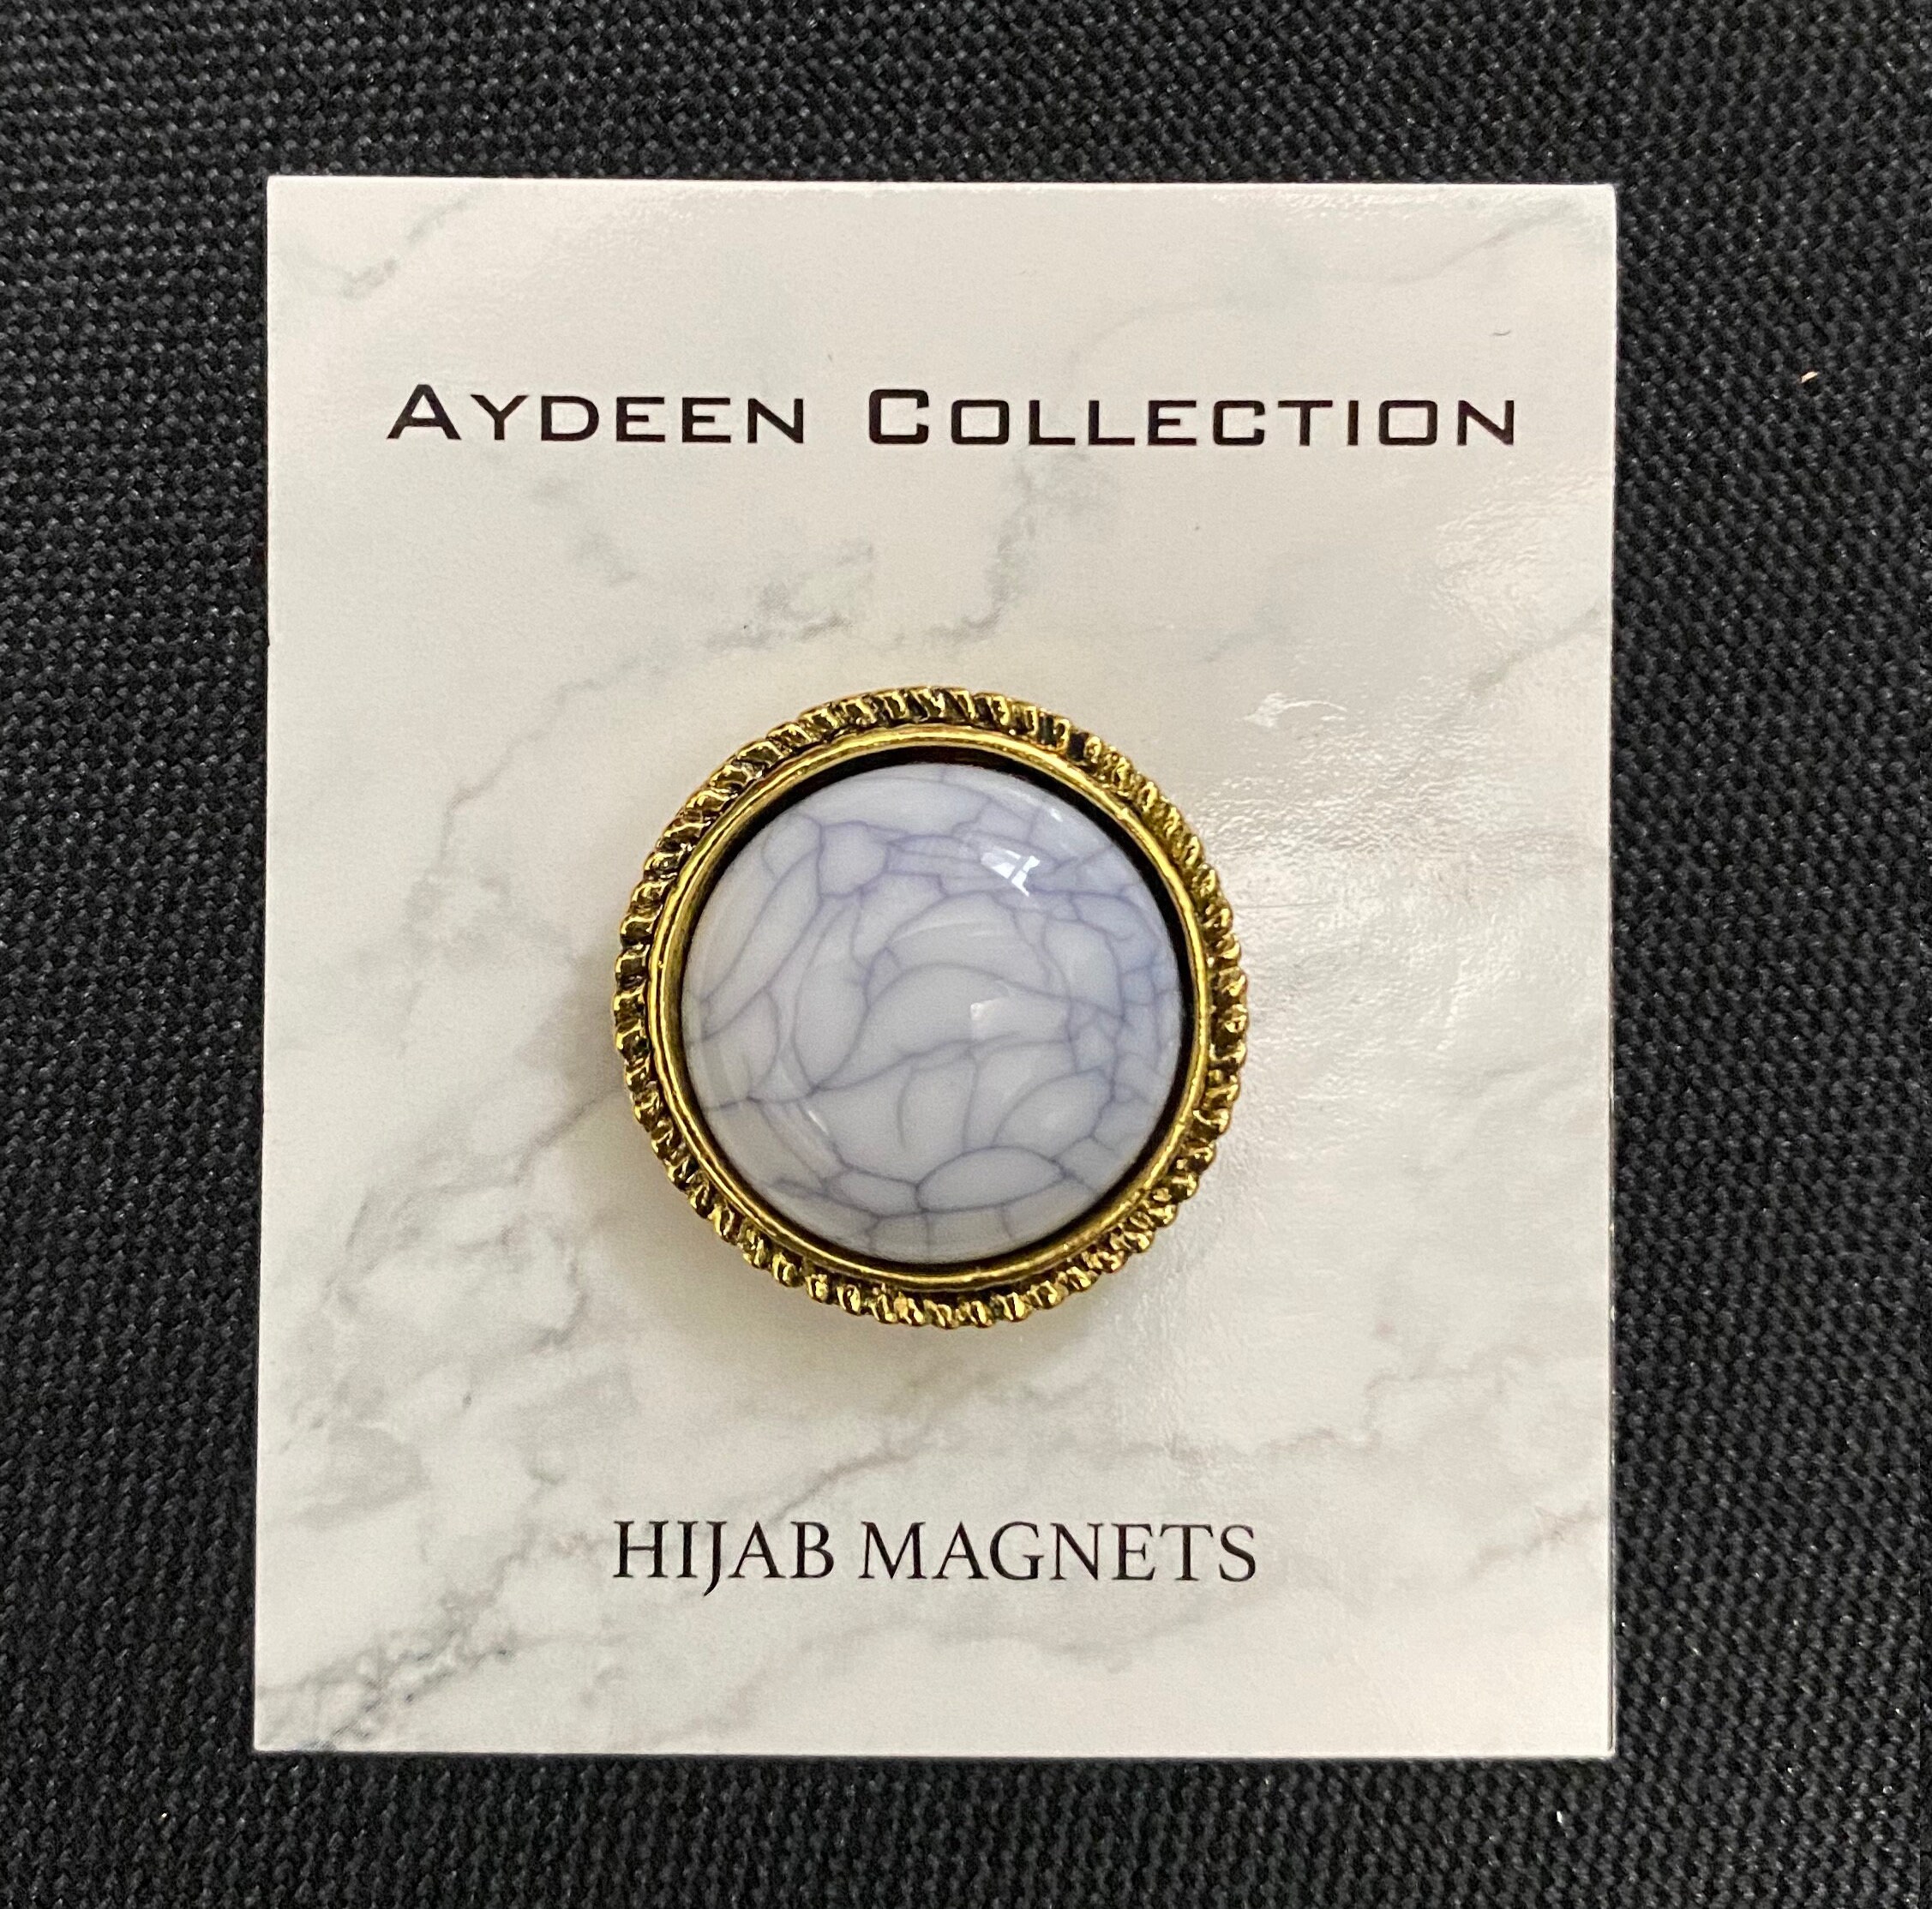 Stay fashionably secure with our hijab magnets that perfect your look. 🤎